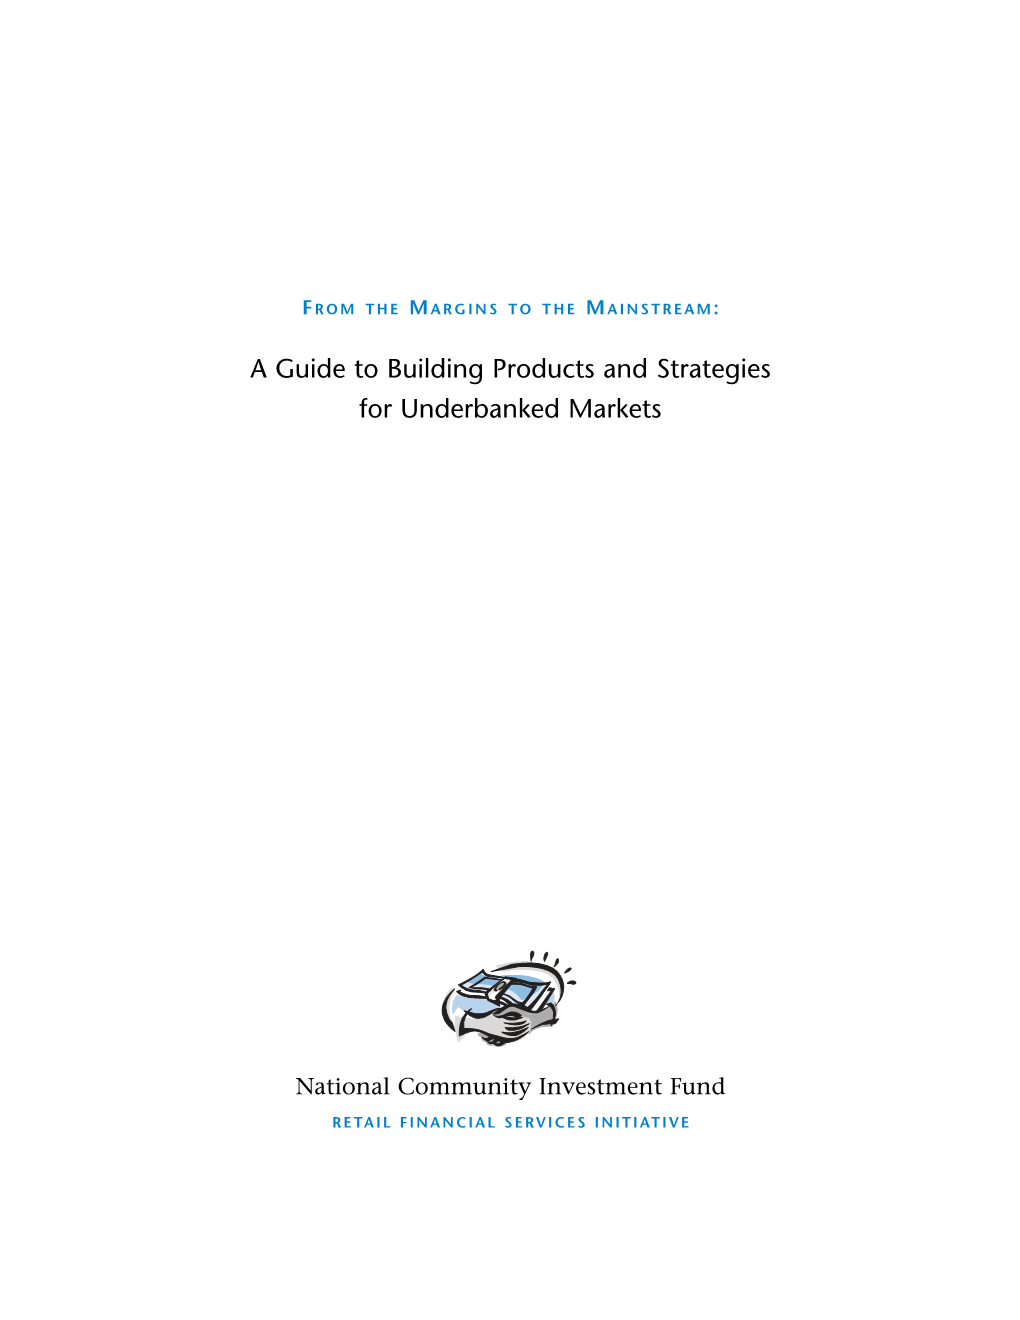 A Guide to Building Products and Strategies for Underbanked Markets